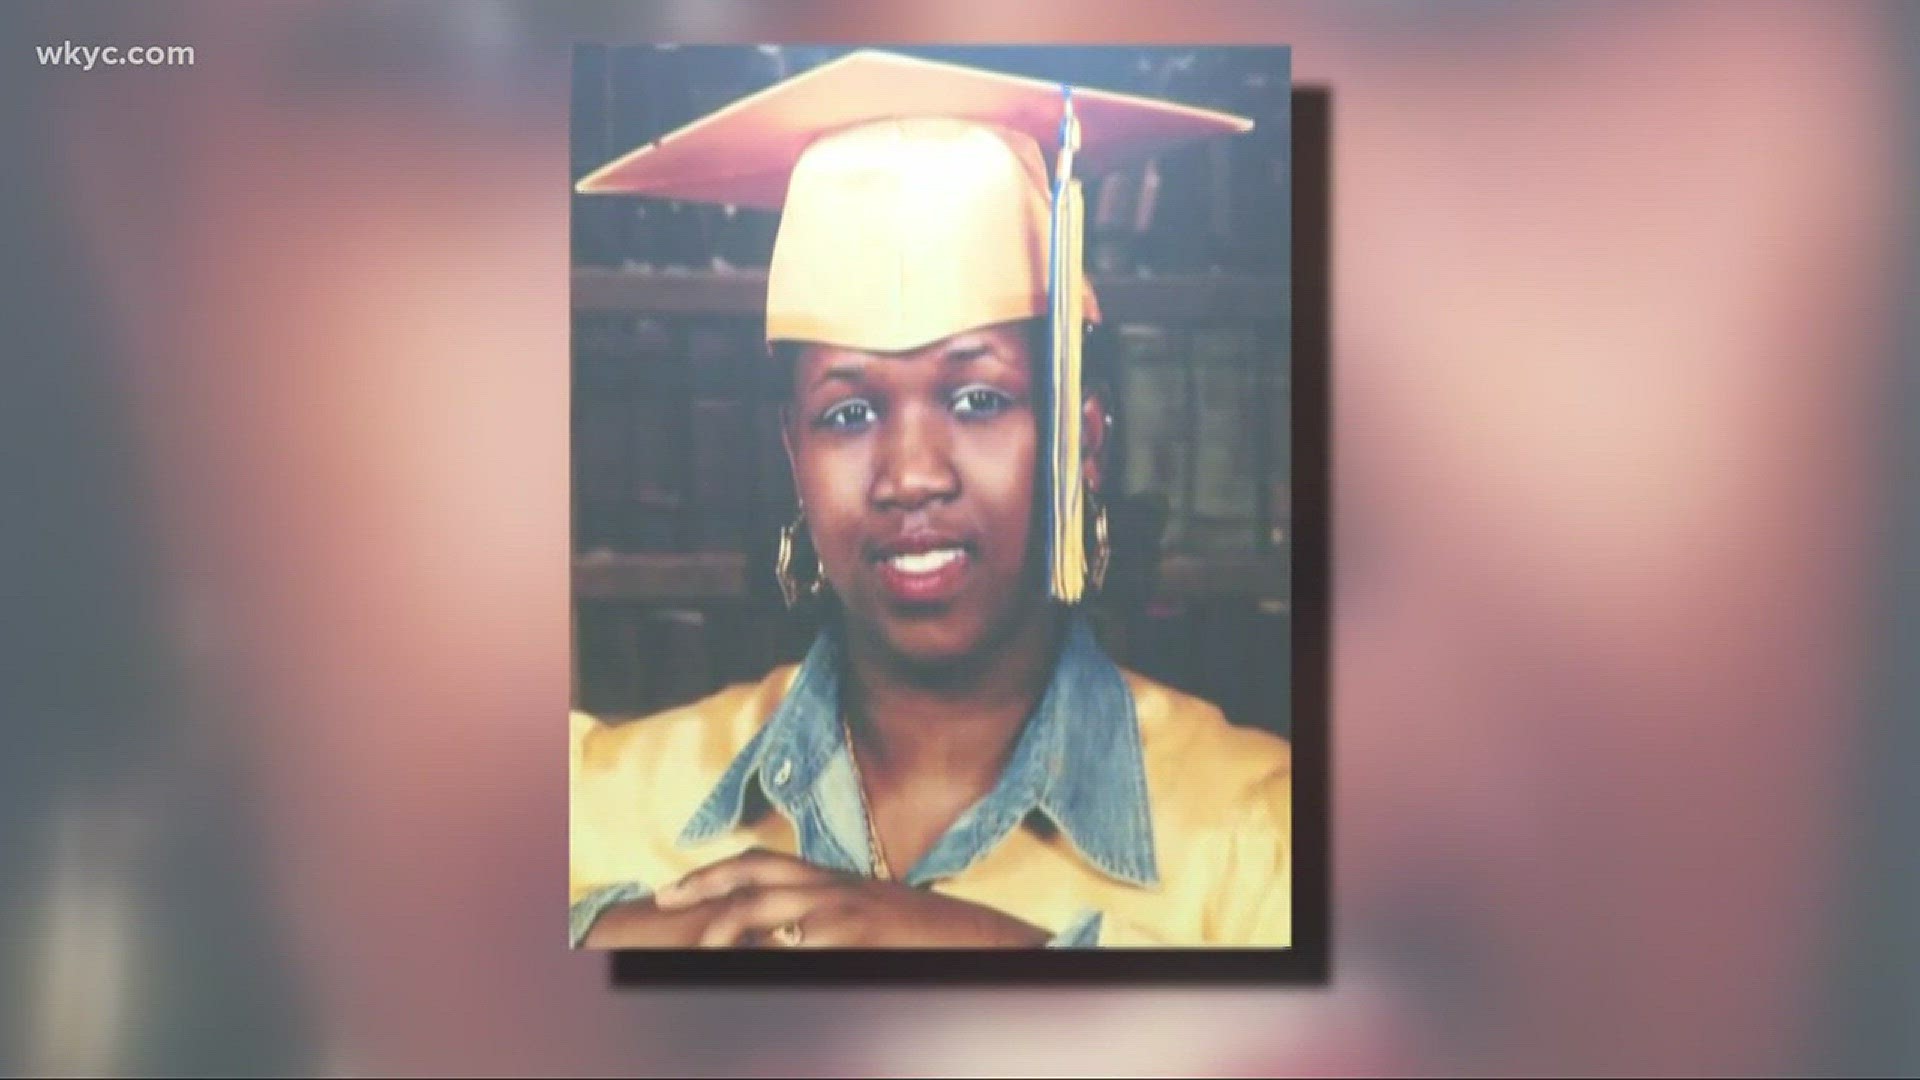 March 13, 2018: The family of Tanisha Anderson, the woman who died while in police custody in 2014, has scheduled a rally for this evening at the intersection of Ansel Road and Superior Avenue at 5 p.m.